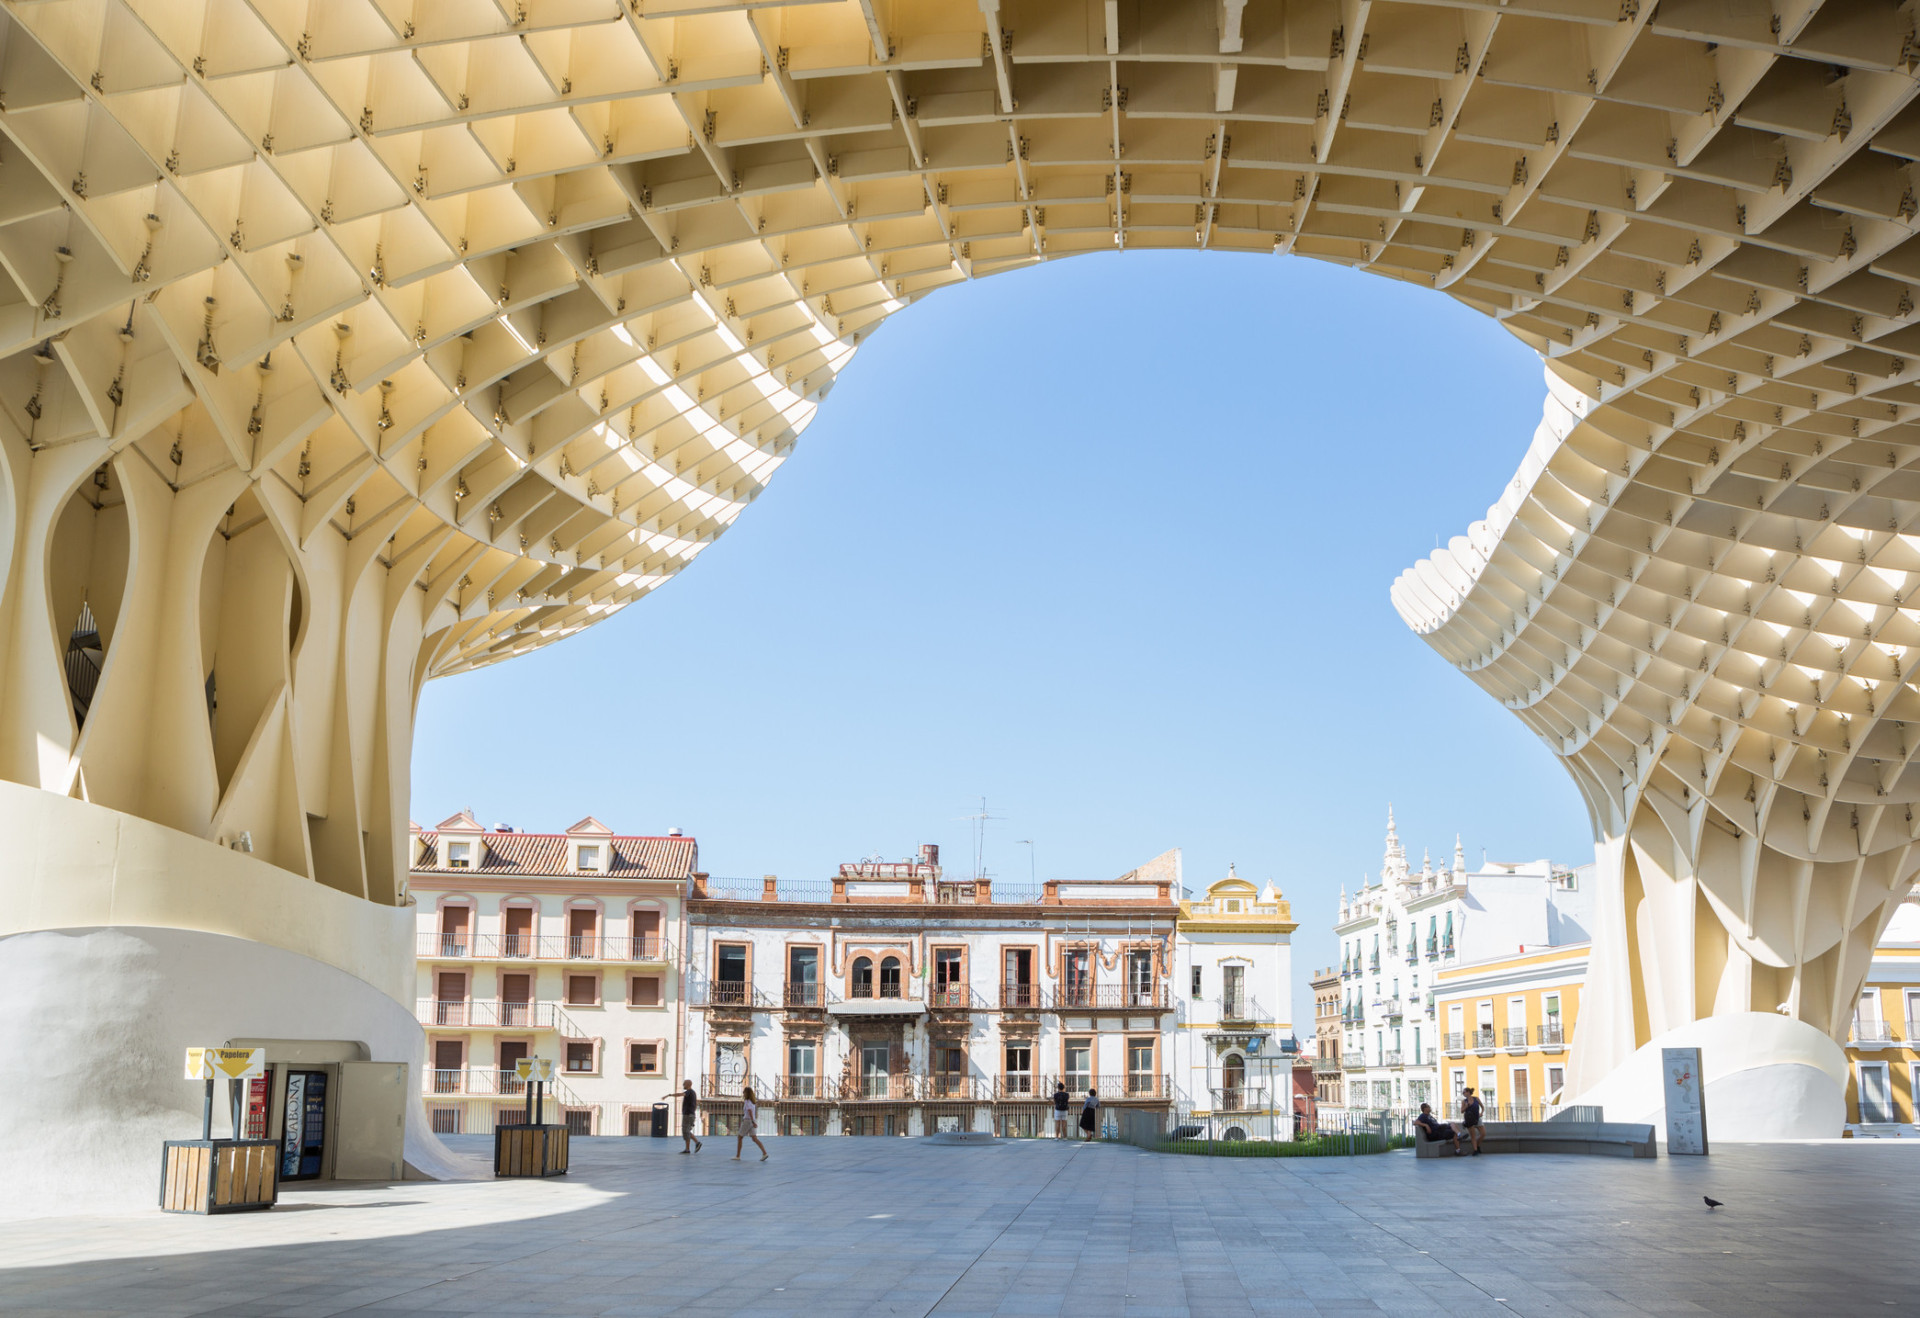 The Andalusian city of Seville has an incredible blend of modern, Moorish, Jewish, and Spanish architecture and culture.<p><a href="https://www.msn.com/en-us/community/channel/vid-7xx8mnucu55yw63we9va2gwr7uihbxwc68fxqp25x6tg4ftibpra?cvid=94631541bc0f4f89bfd59158d696ad7e">Follow us and access great exclusive content every day</a></p>